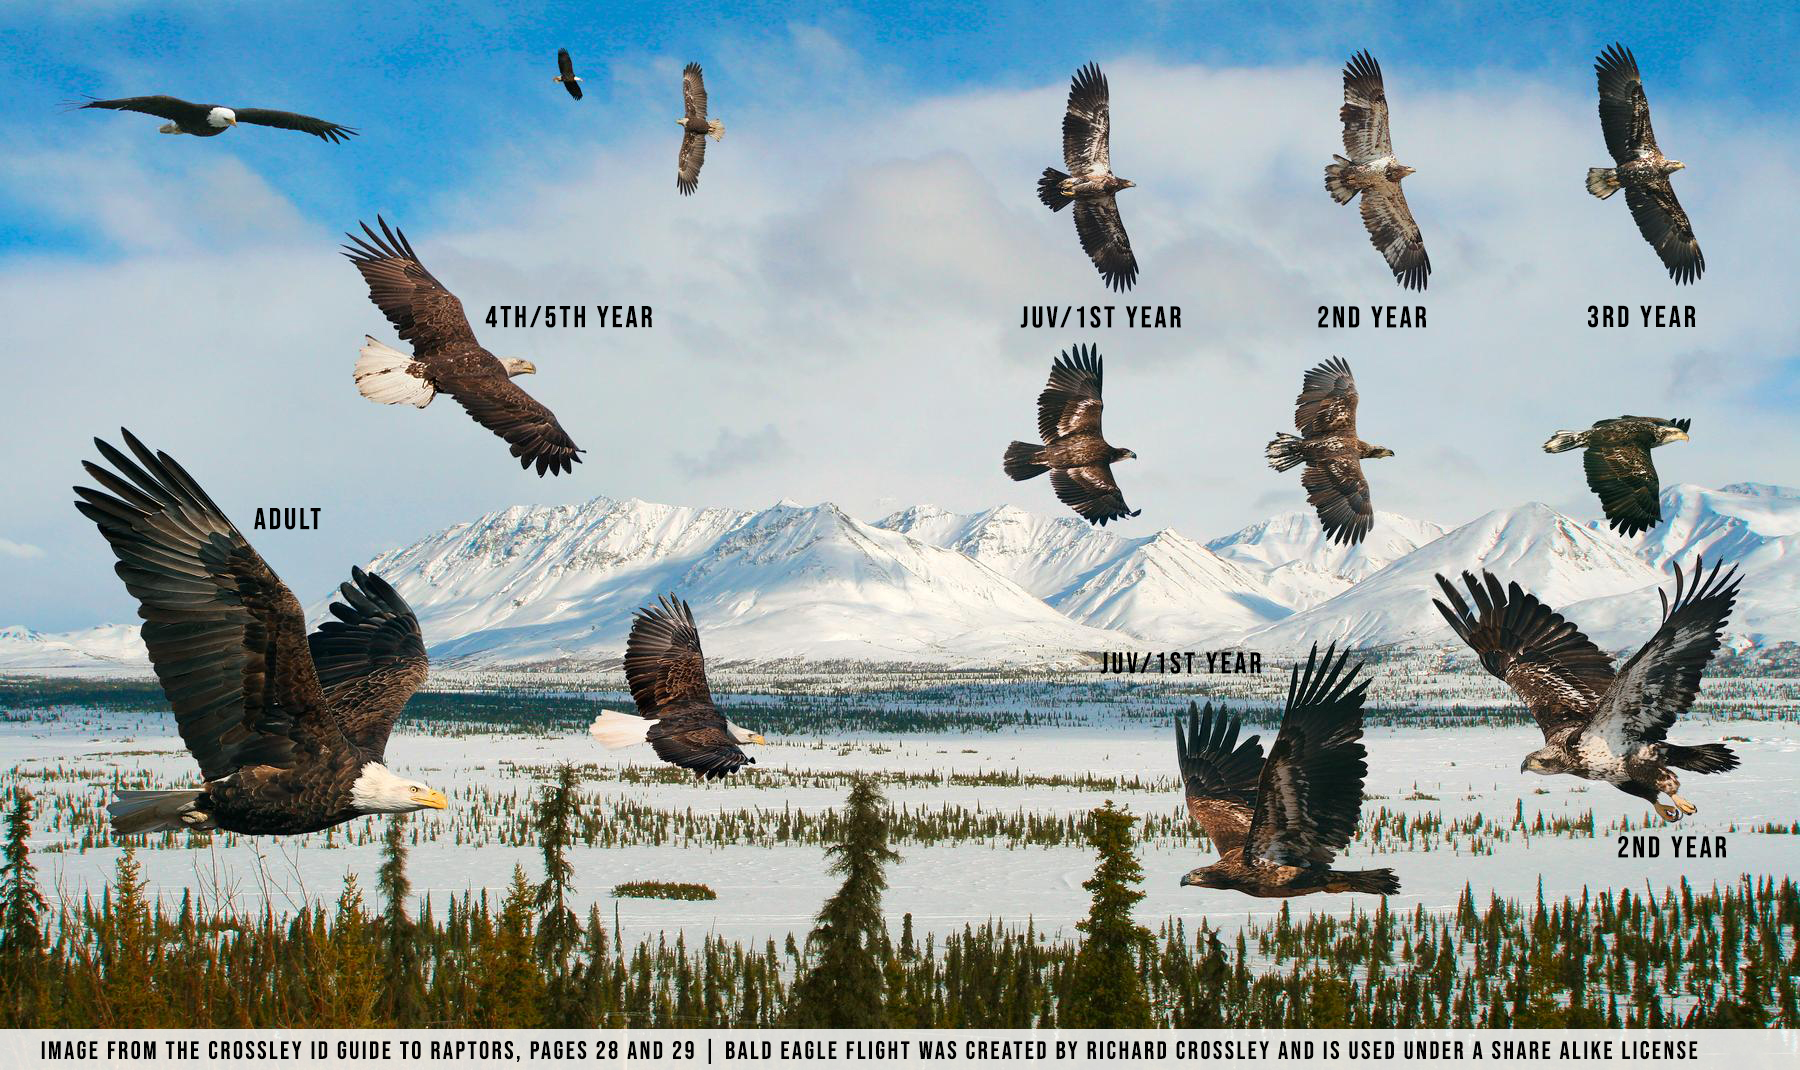 Bald Eagle Flight From the Crossley Guide to Raptors.